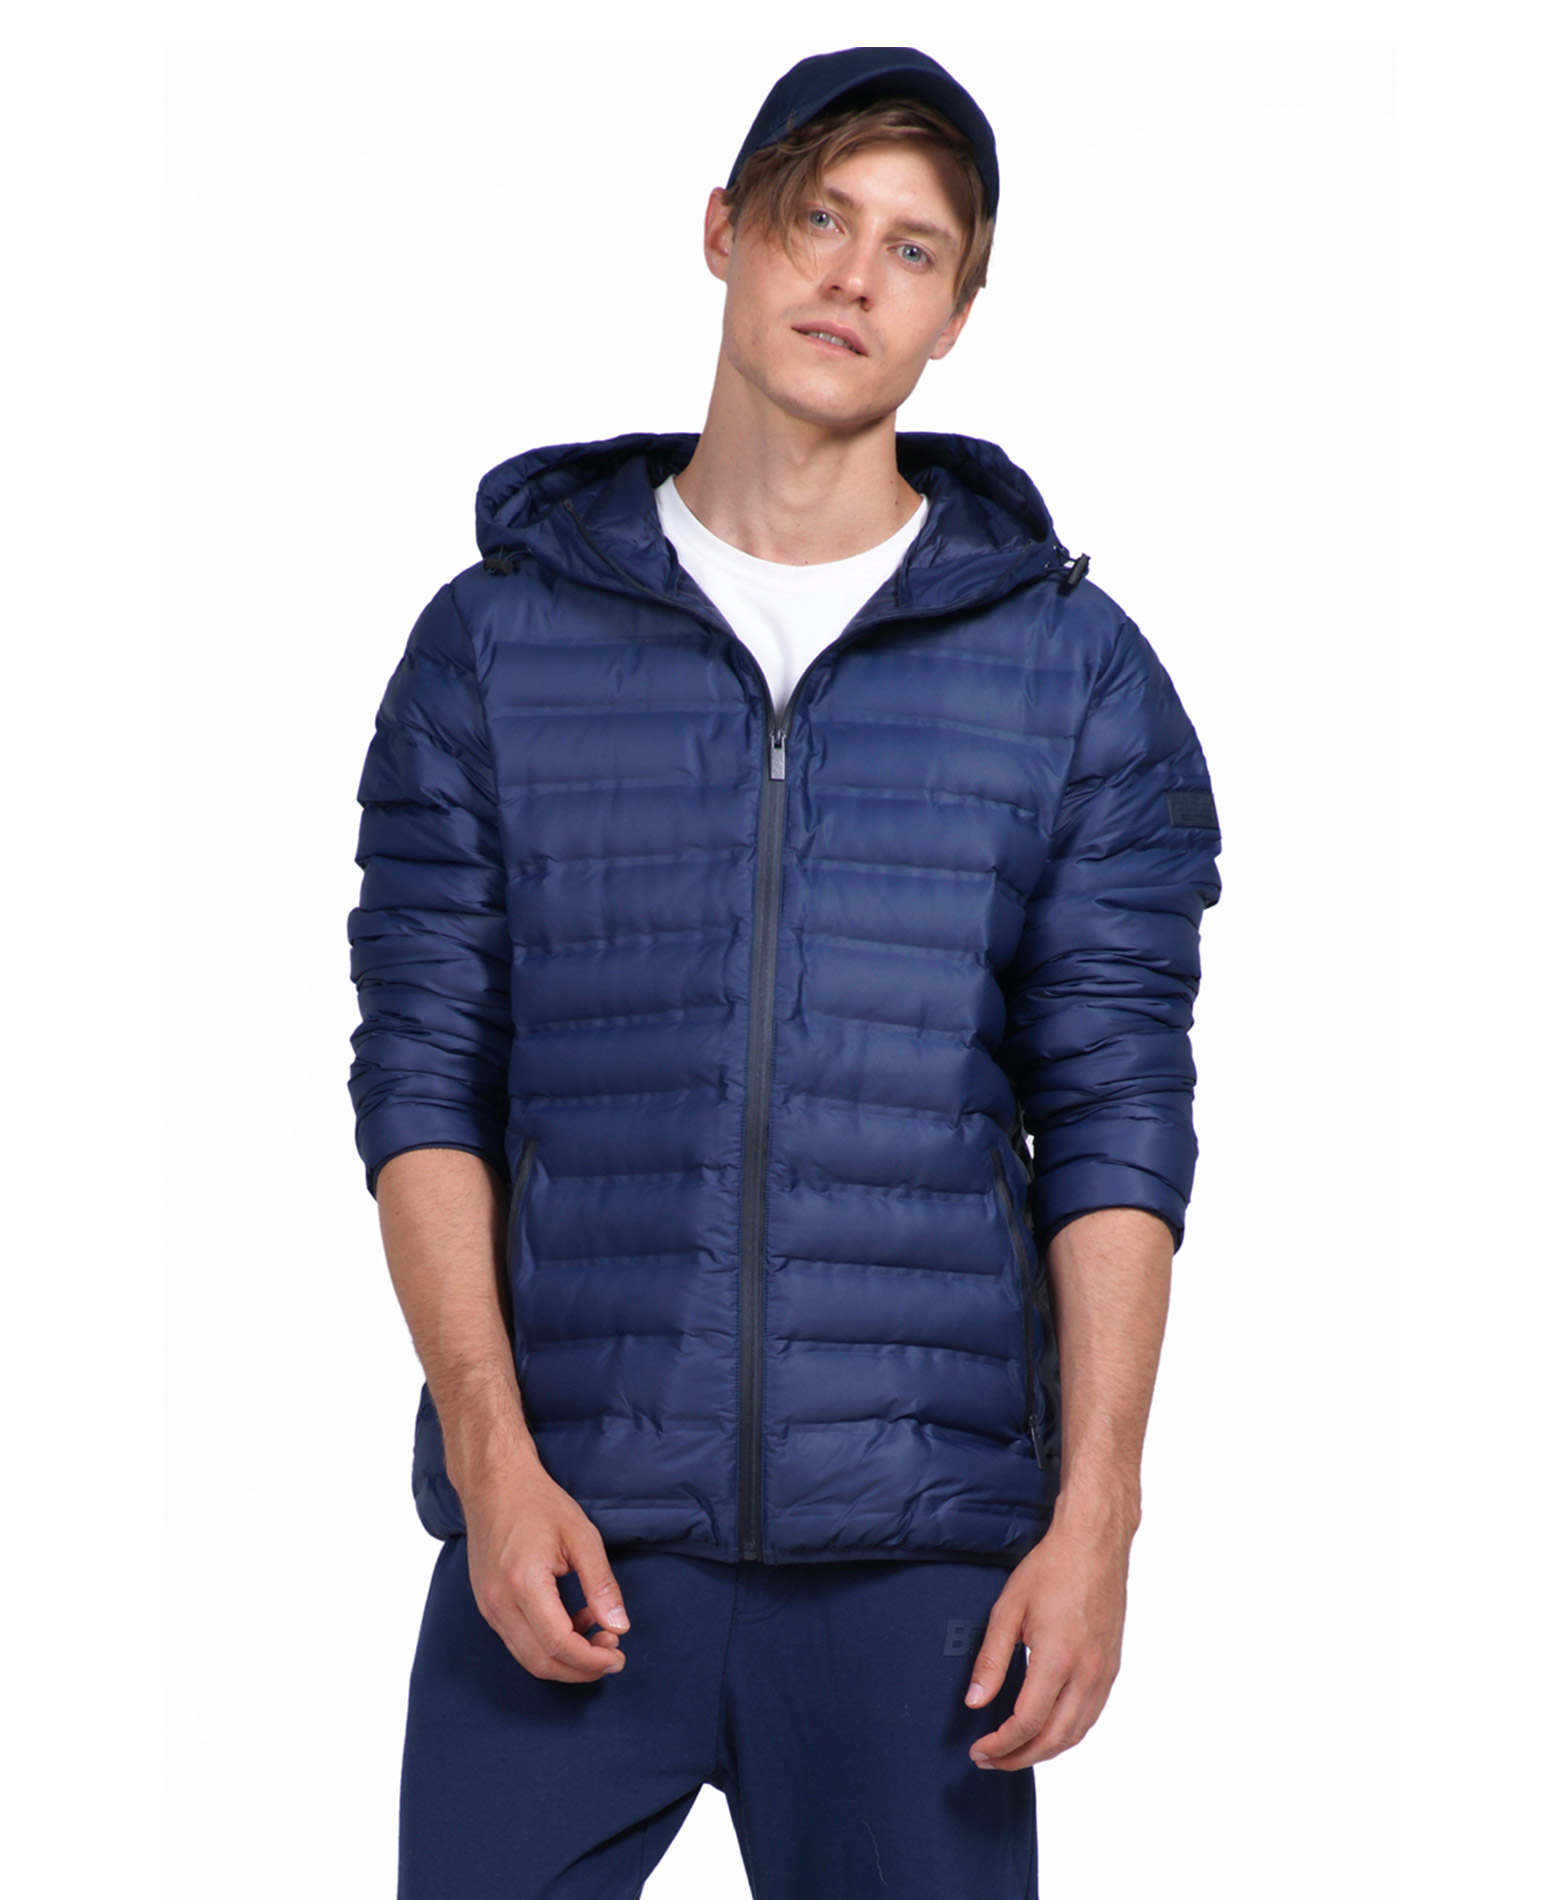 BODY ACTION MEN QUILT PADDED JACKET WITH HOOD 073926-01-04K Μπλε